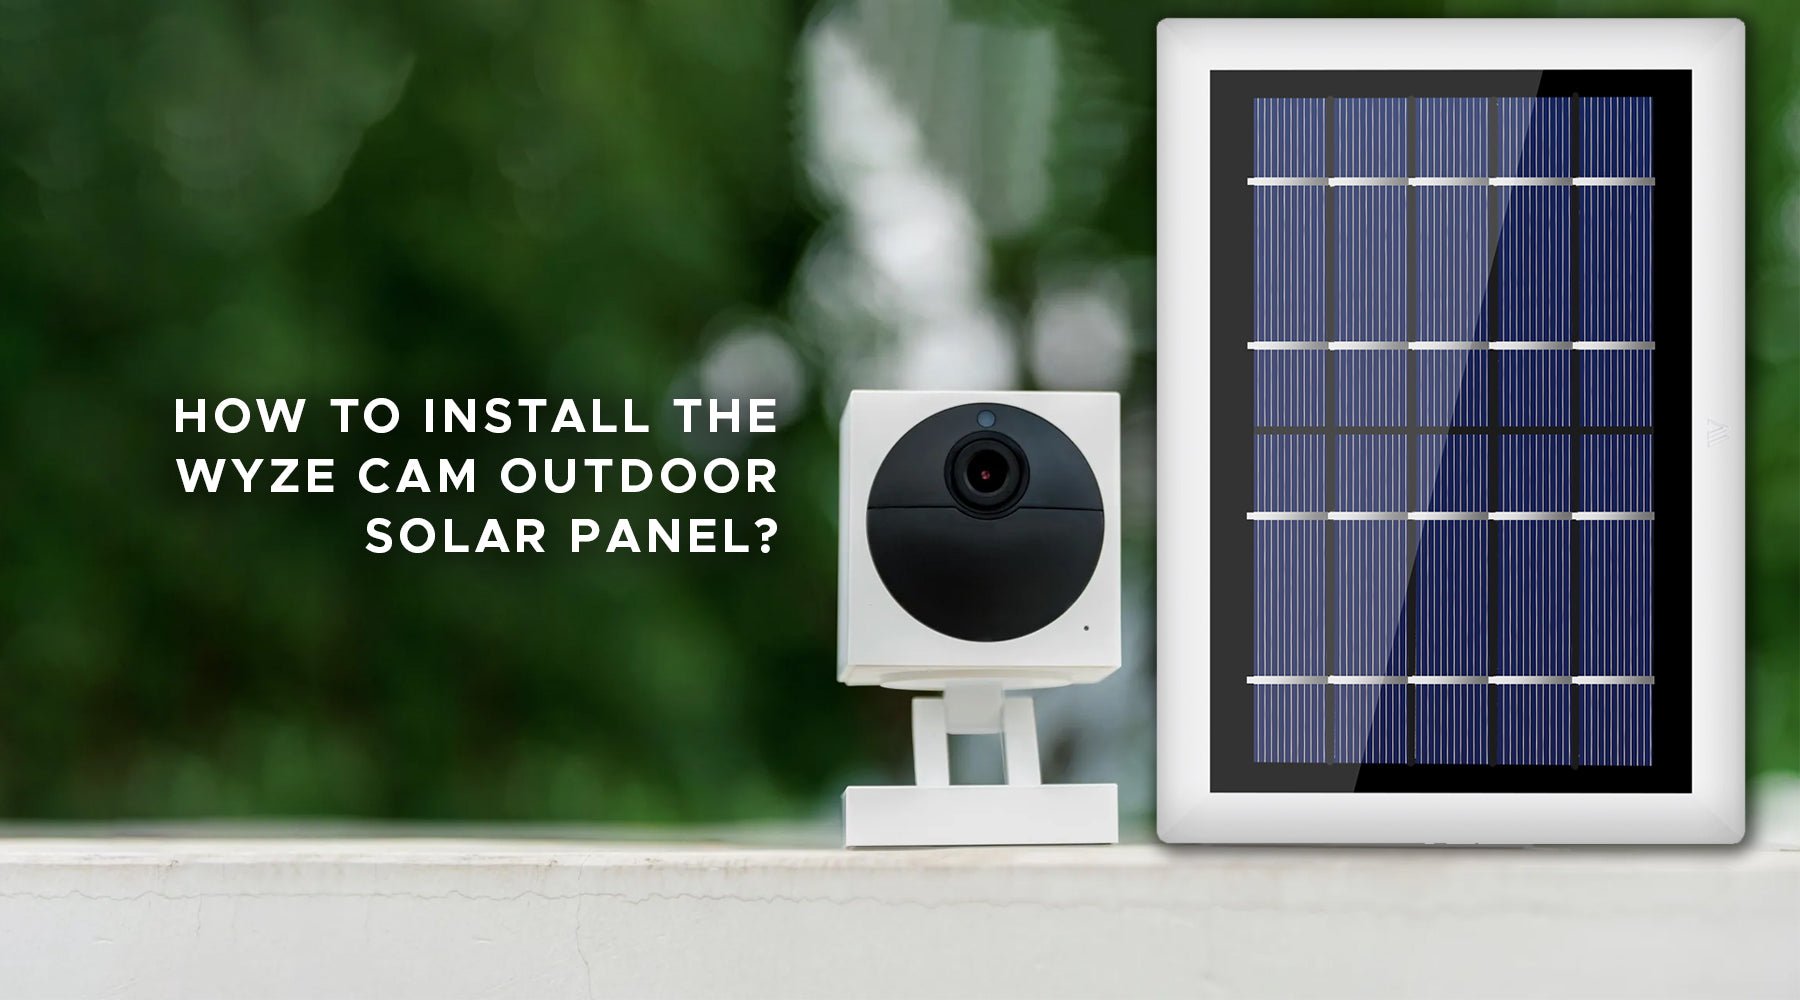 How to install the Solar Panel for Wyze Cam Outdoor?